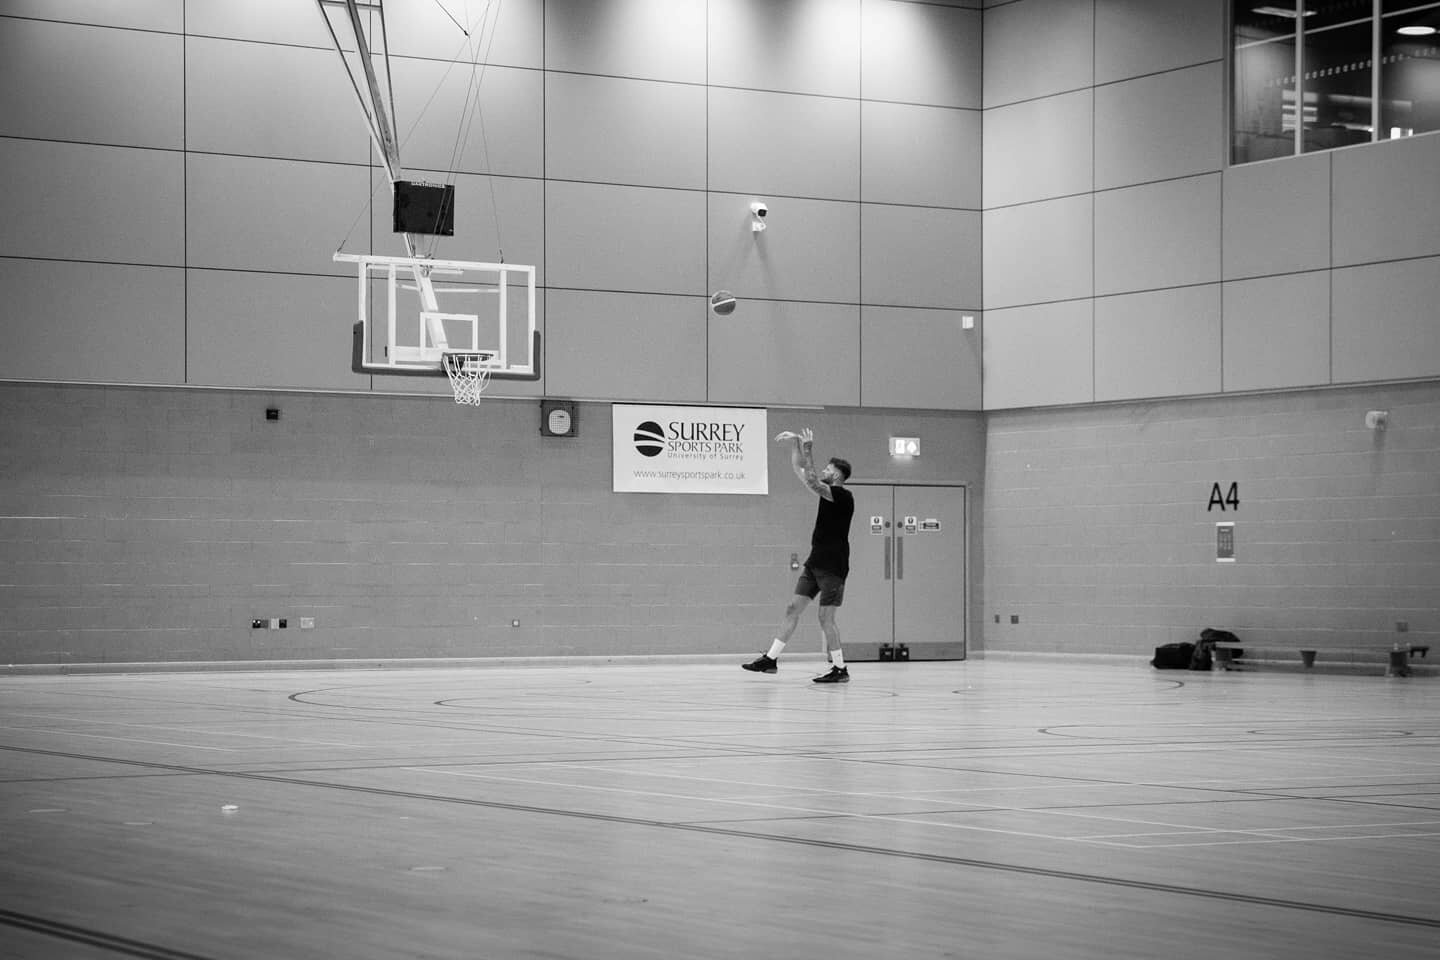 &quot;What you do when no one is watching is what seperates a champion&quot;. 
.
Joel Freeland still keeping in shape down at the Surrey Scorchers bubble this morning #basketball #hardwork #bball #hoops